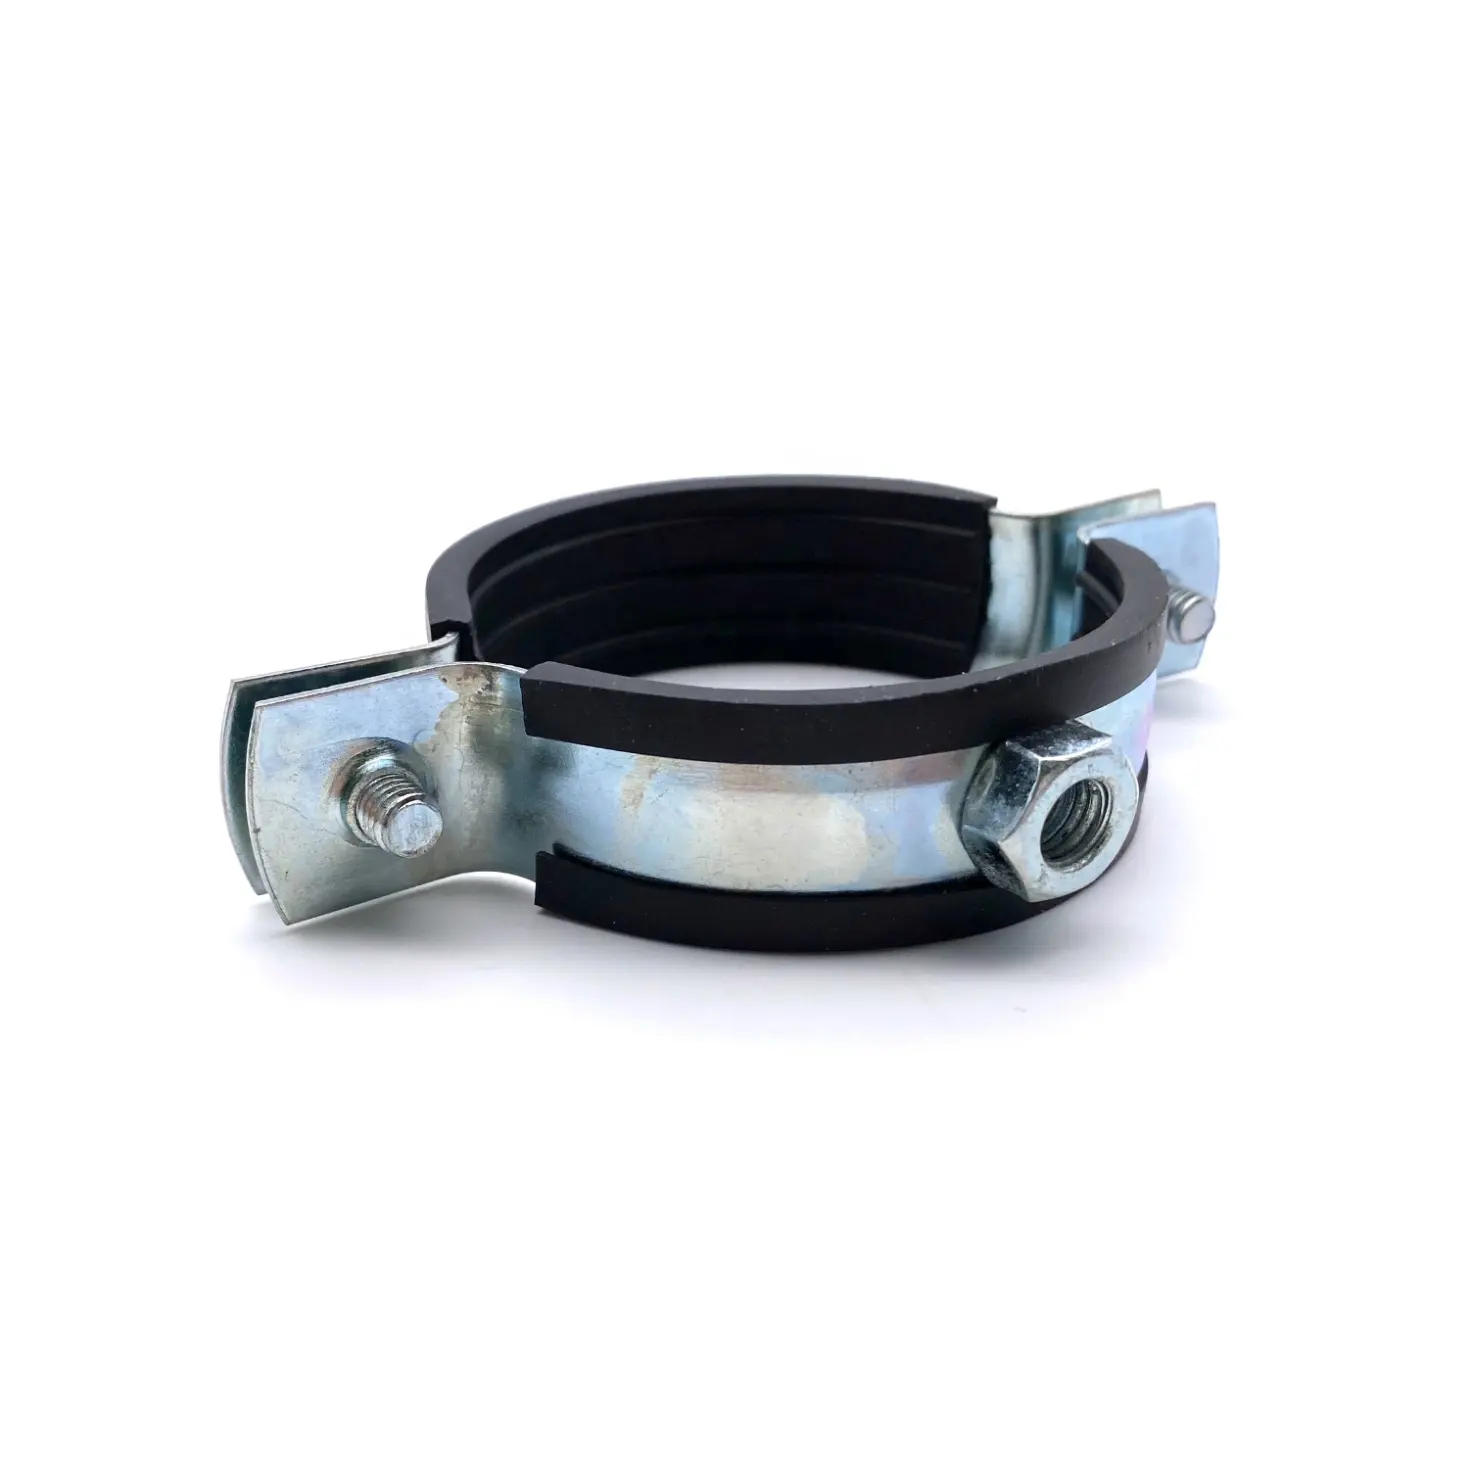 Metal pipe clamp with nut 2" 60-64 mm M8